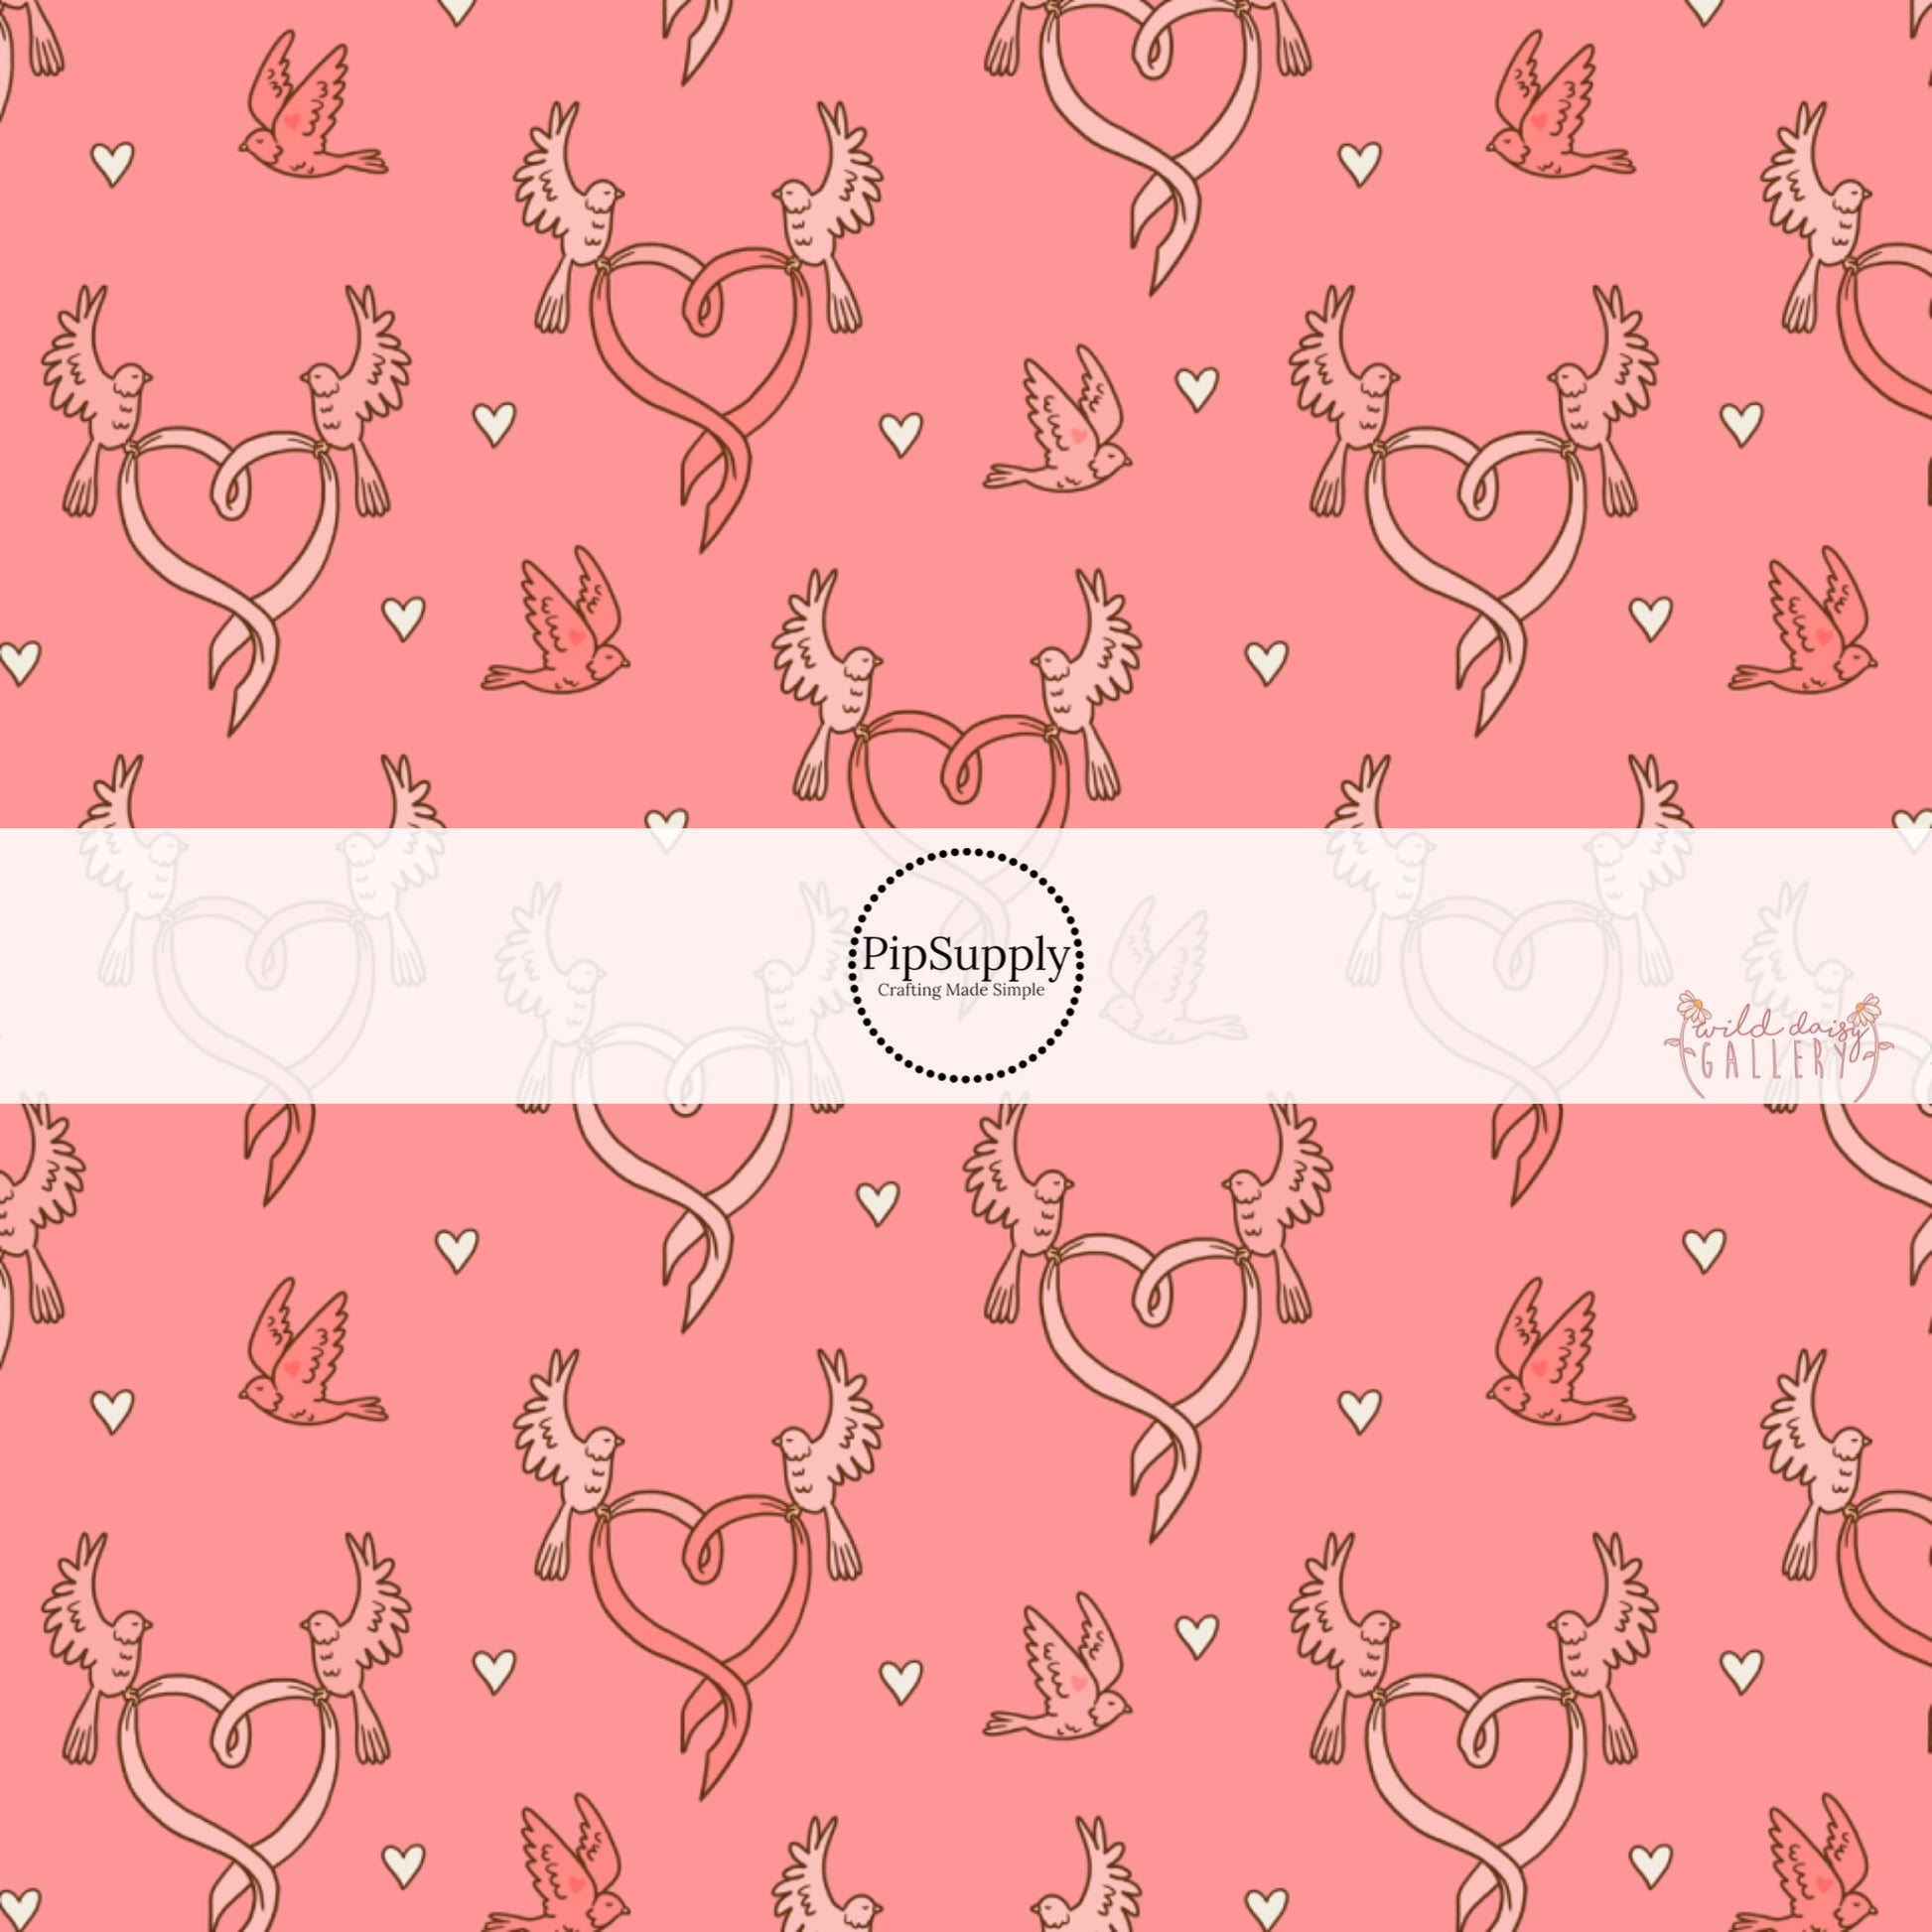 Love Doves and Hearts on Peachy Pink Fabric by the Yard.